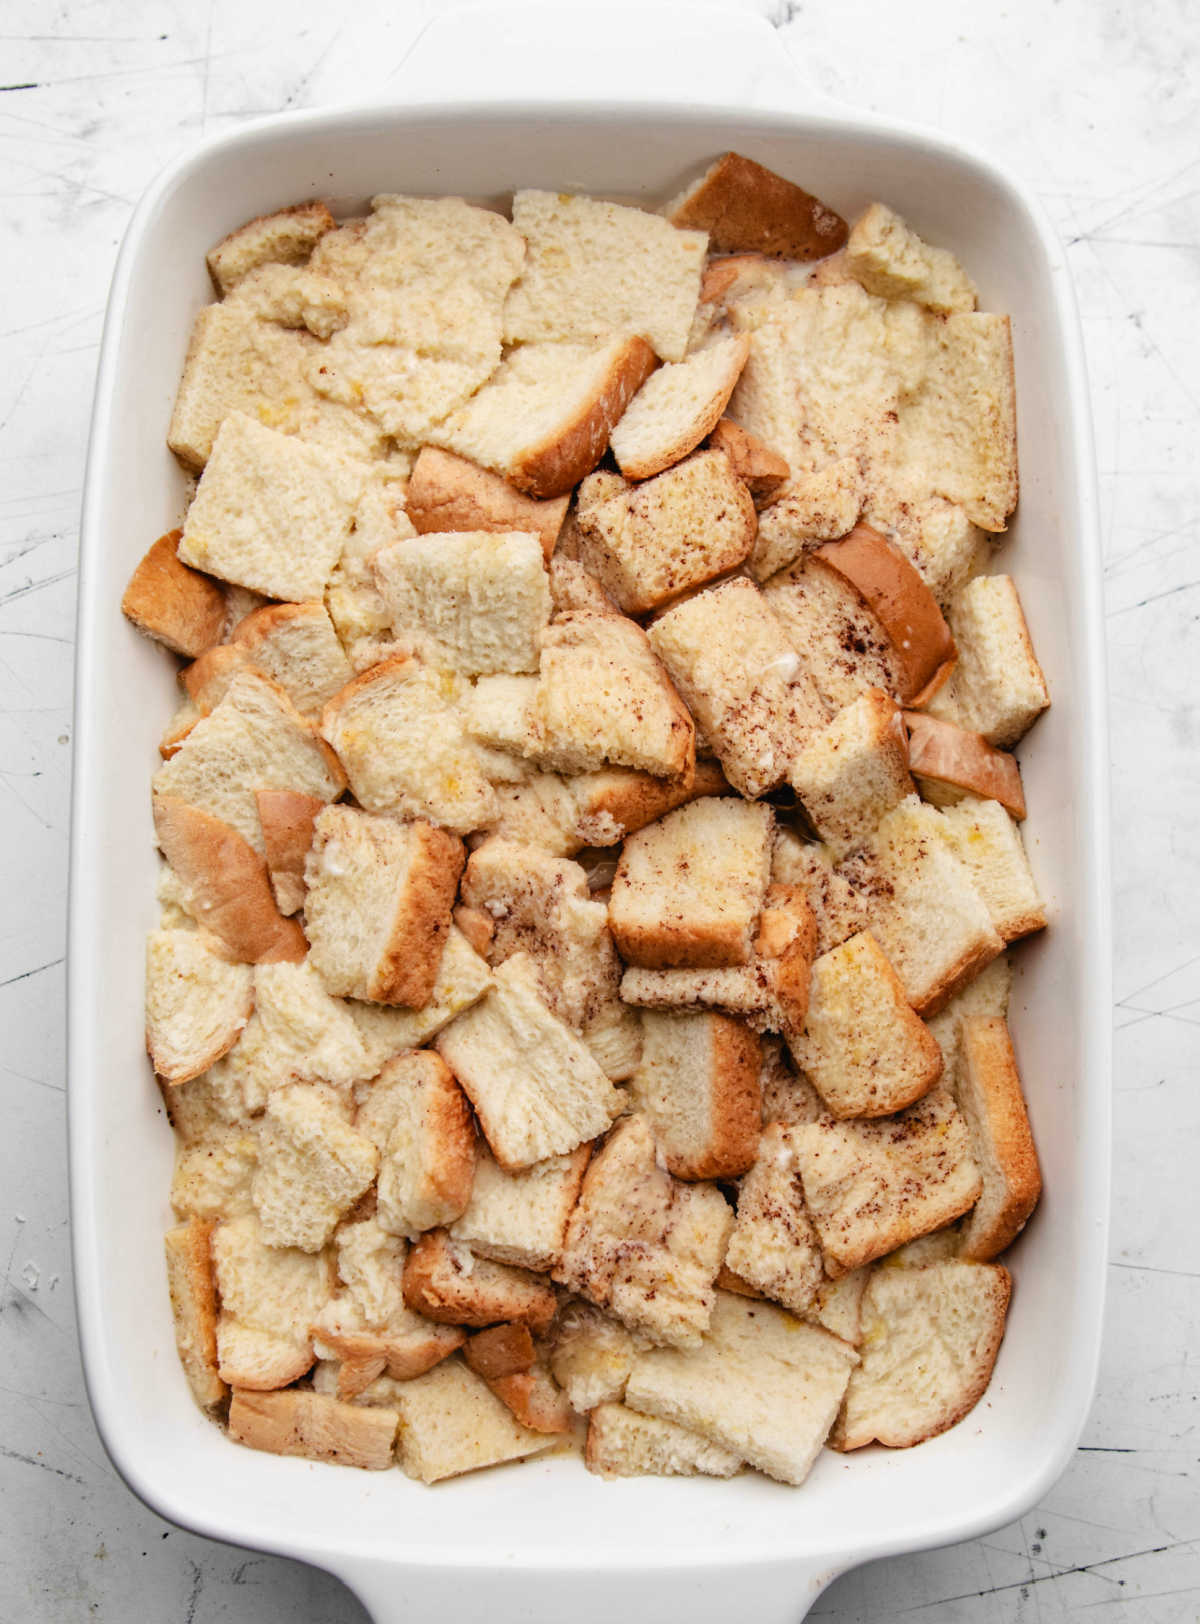 Egg mixture poured over cubed white bread in a white baking dish.